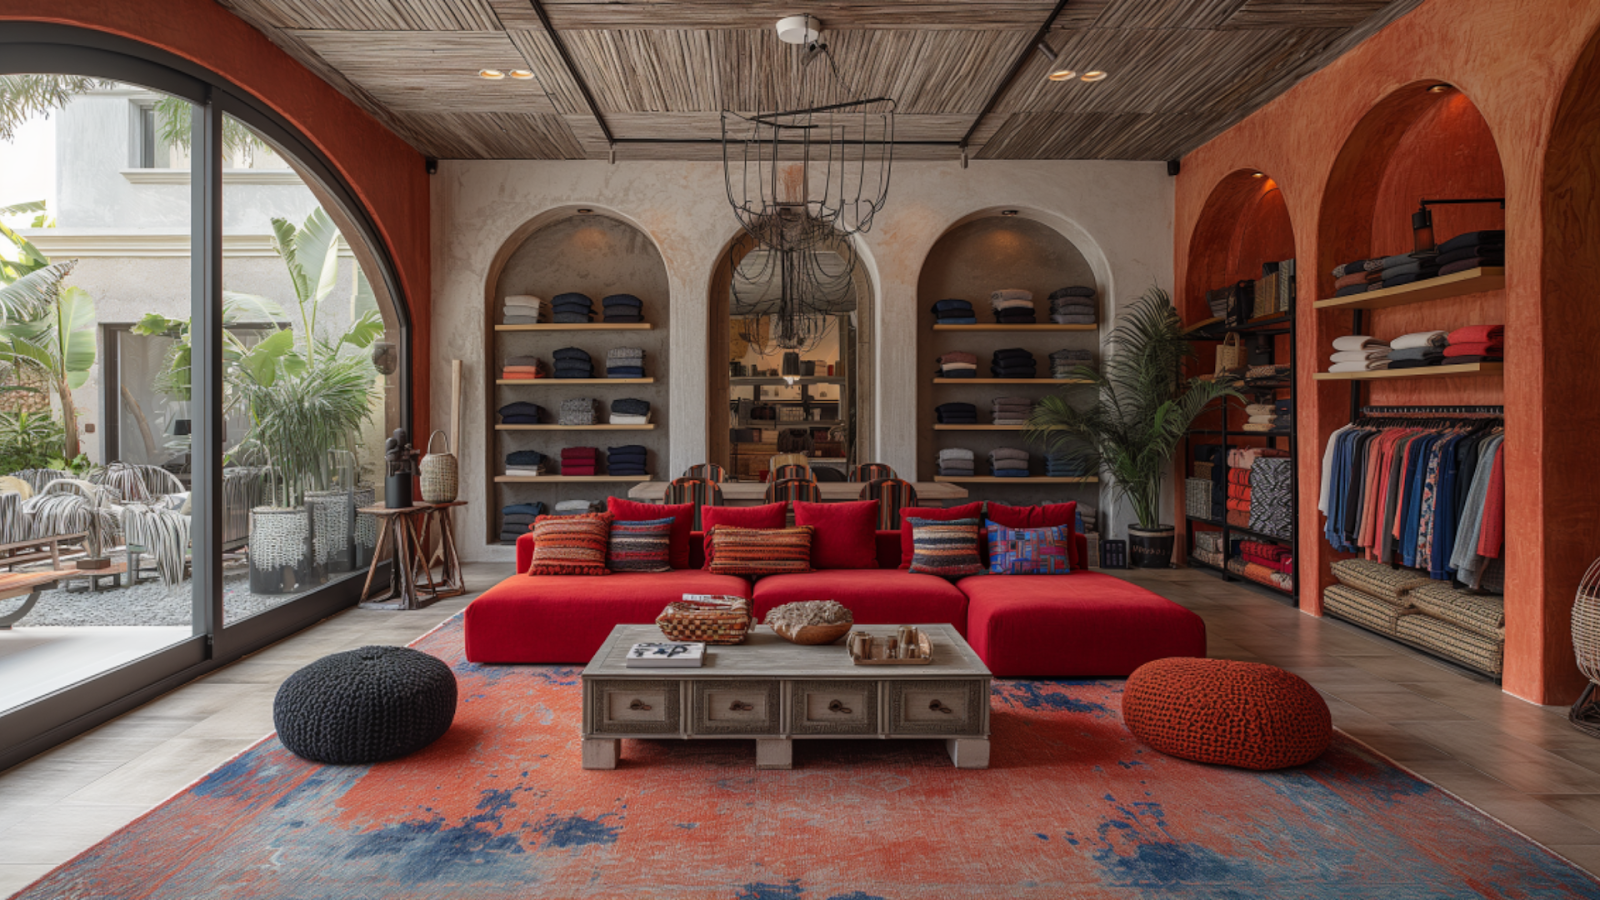 Inside a stylish and chic fashion boutique in Playa del Carmen.